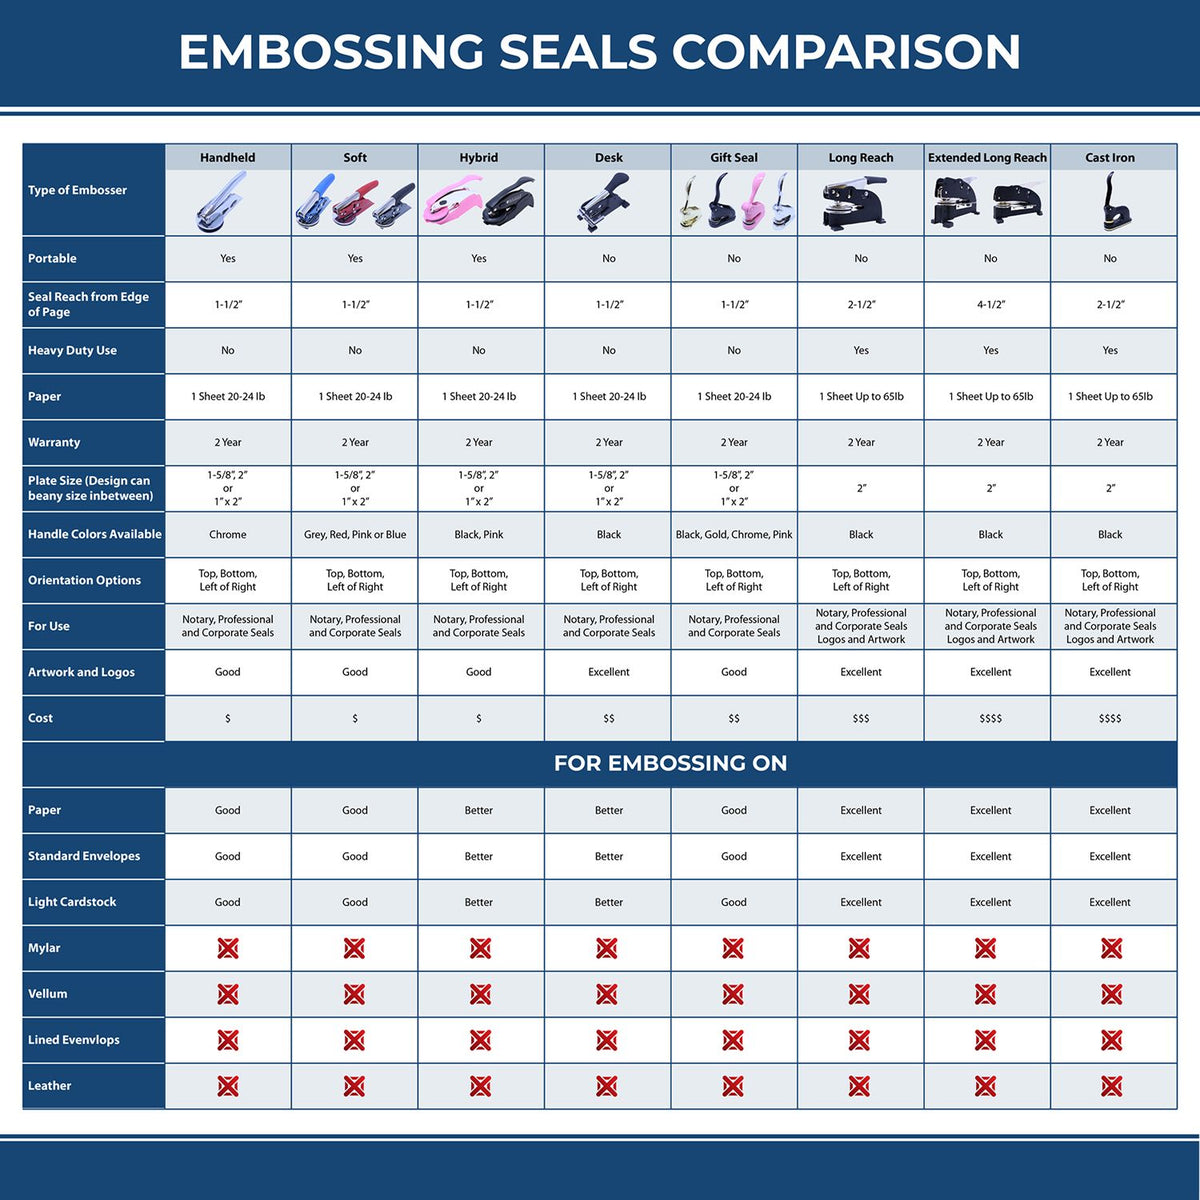 A comparison chart for the different types of mount models available for the Extended Long Reach Mississippi Architect Seal Embosser.